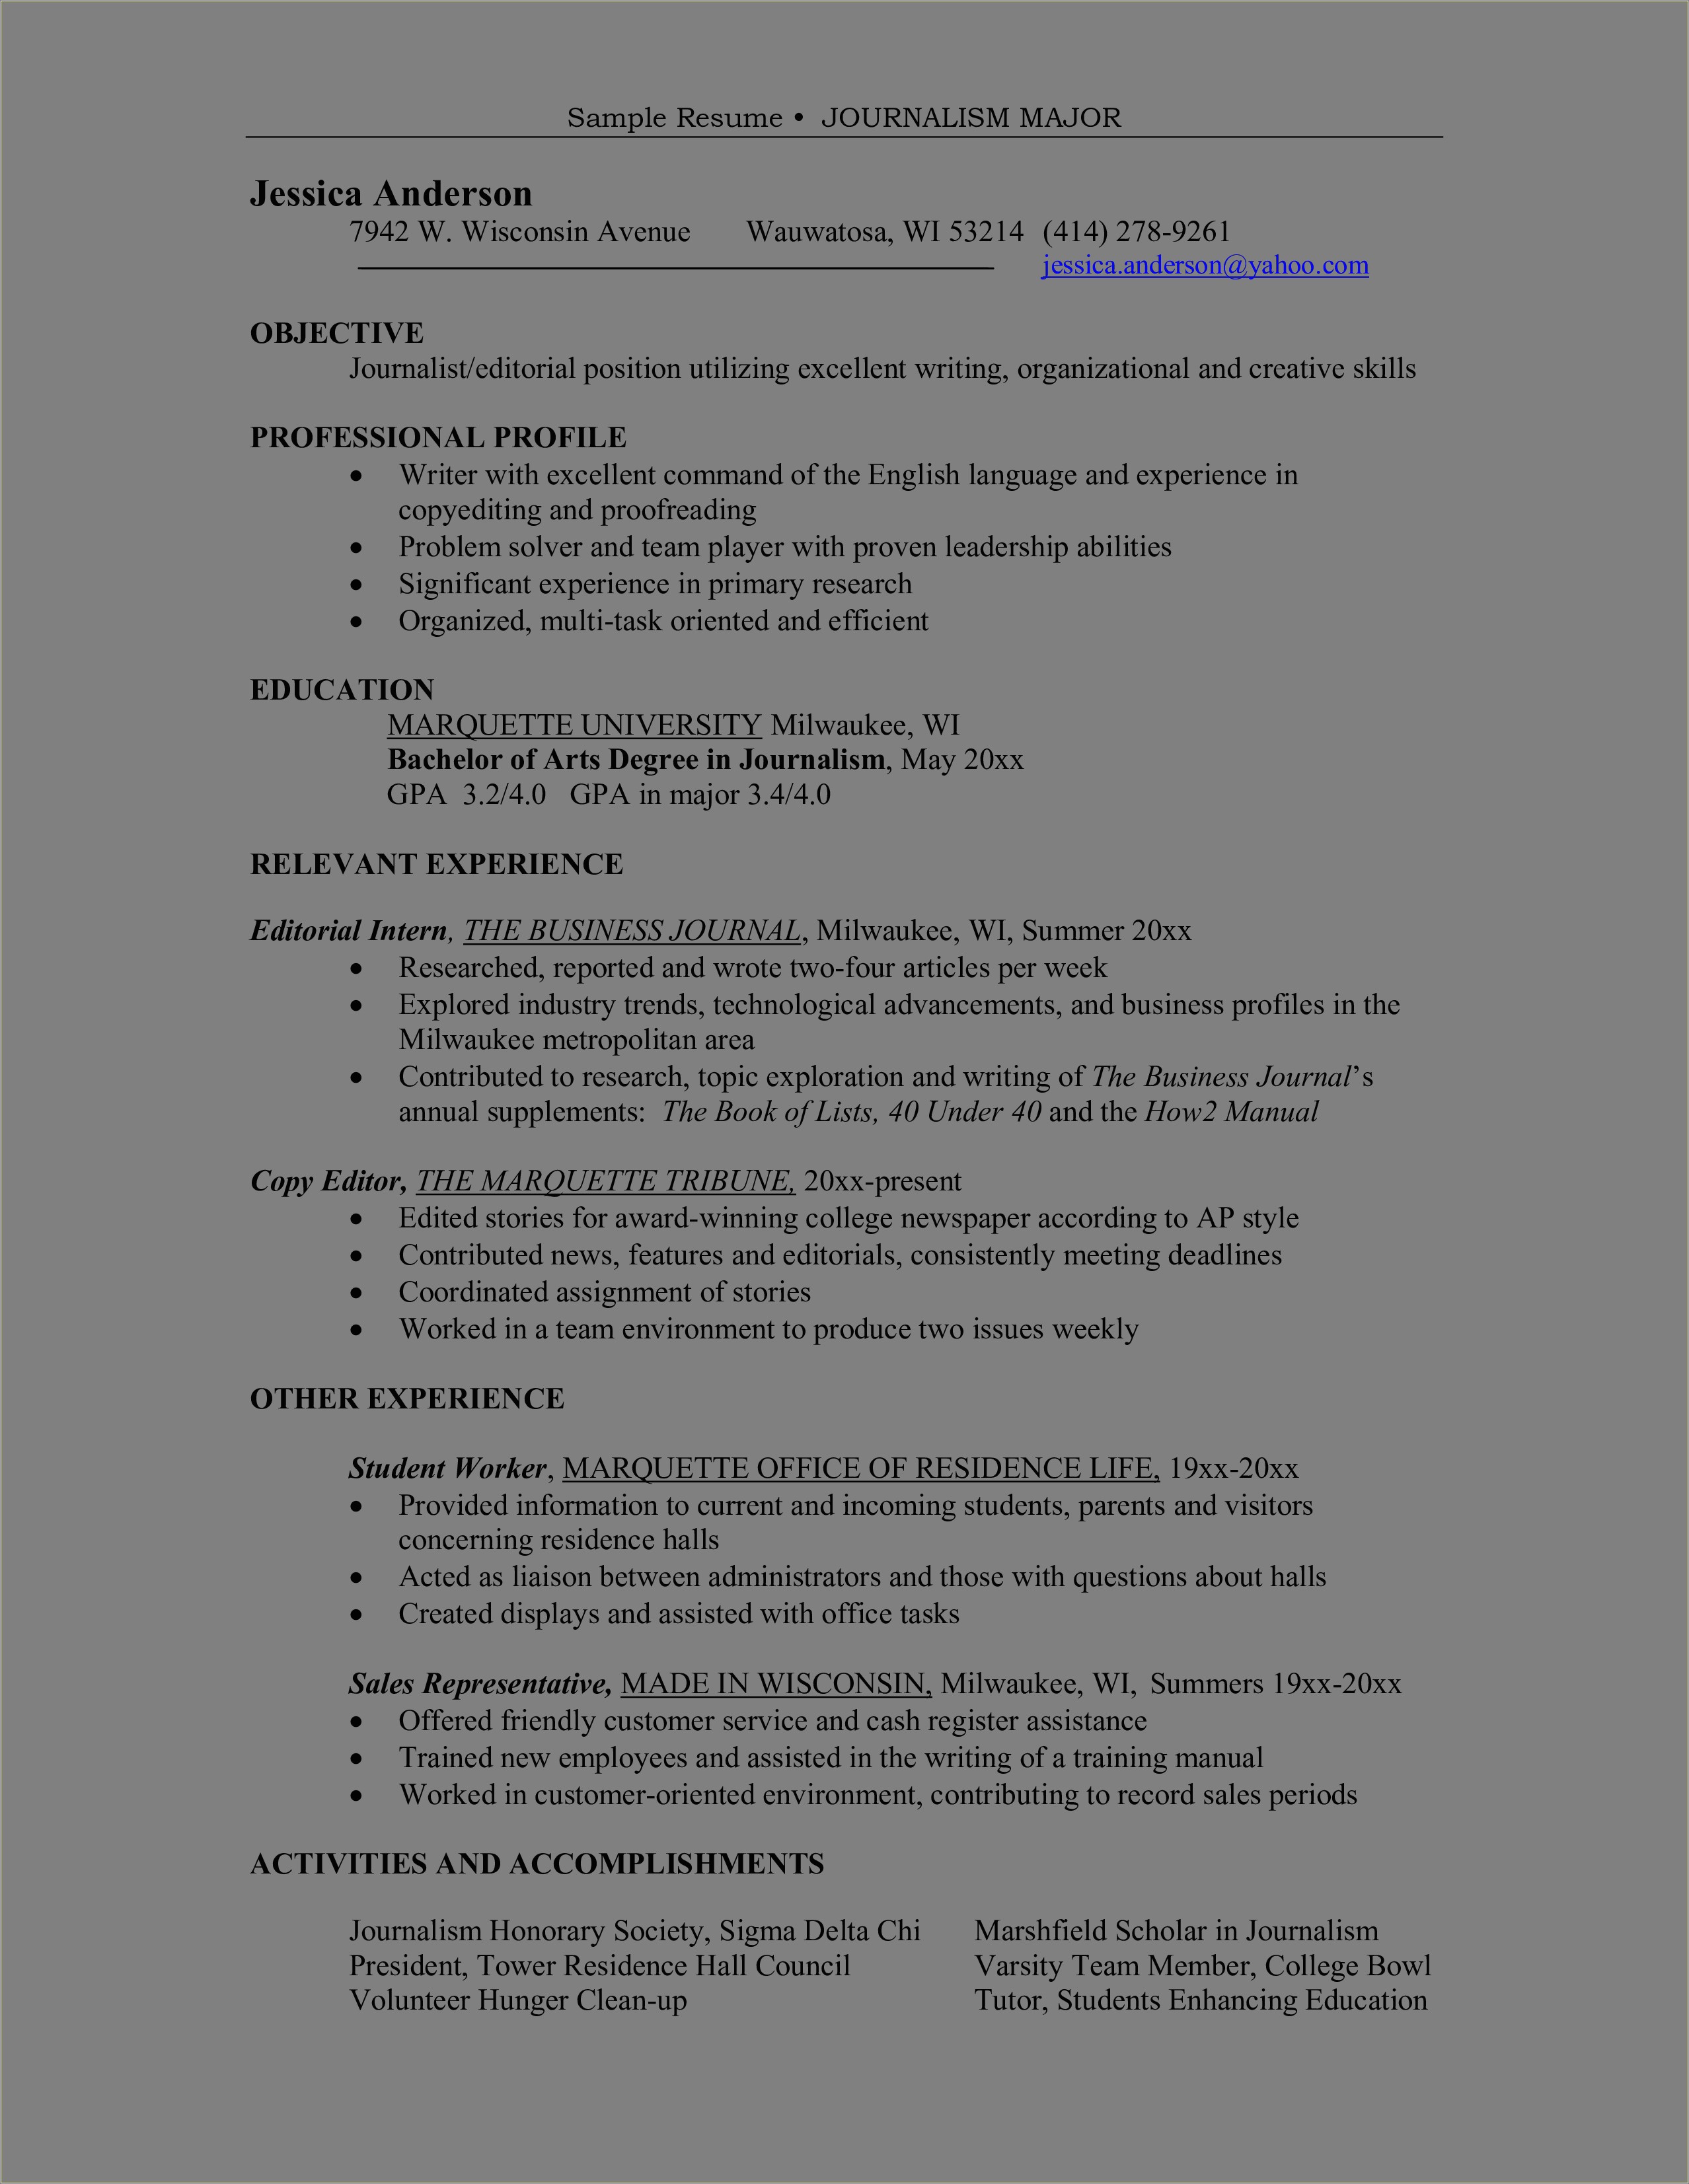 Sample Resume For Degree Students Download